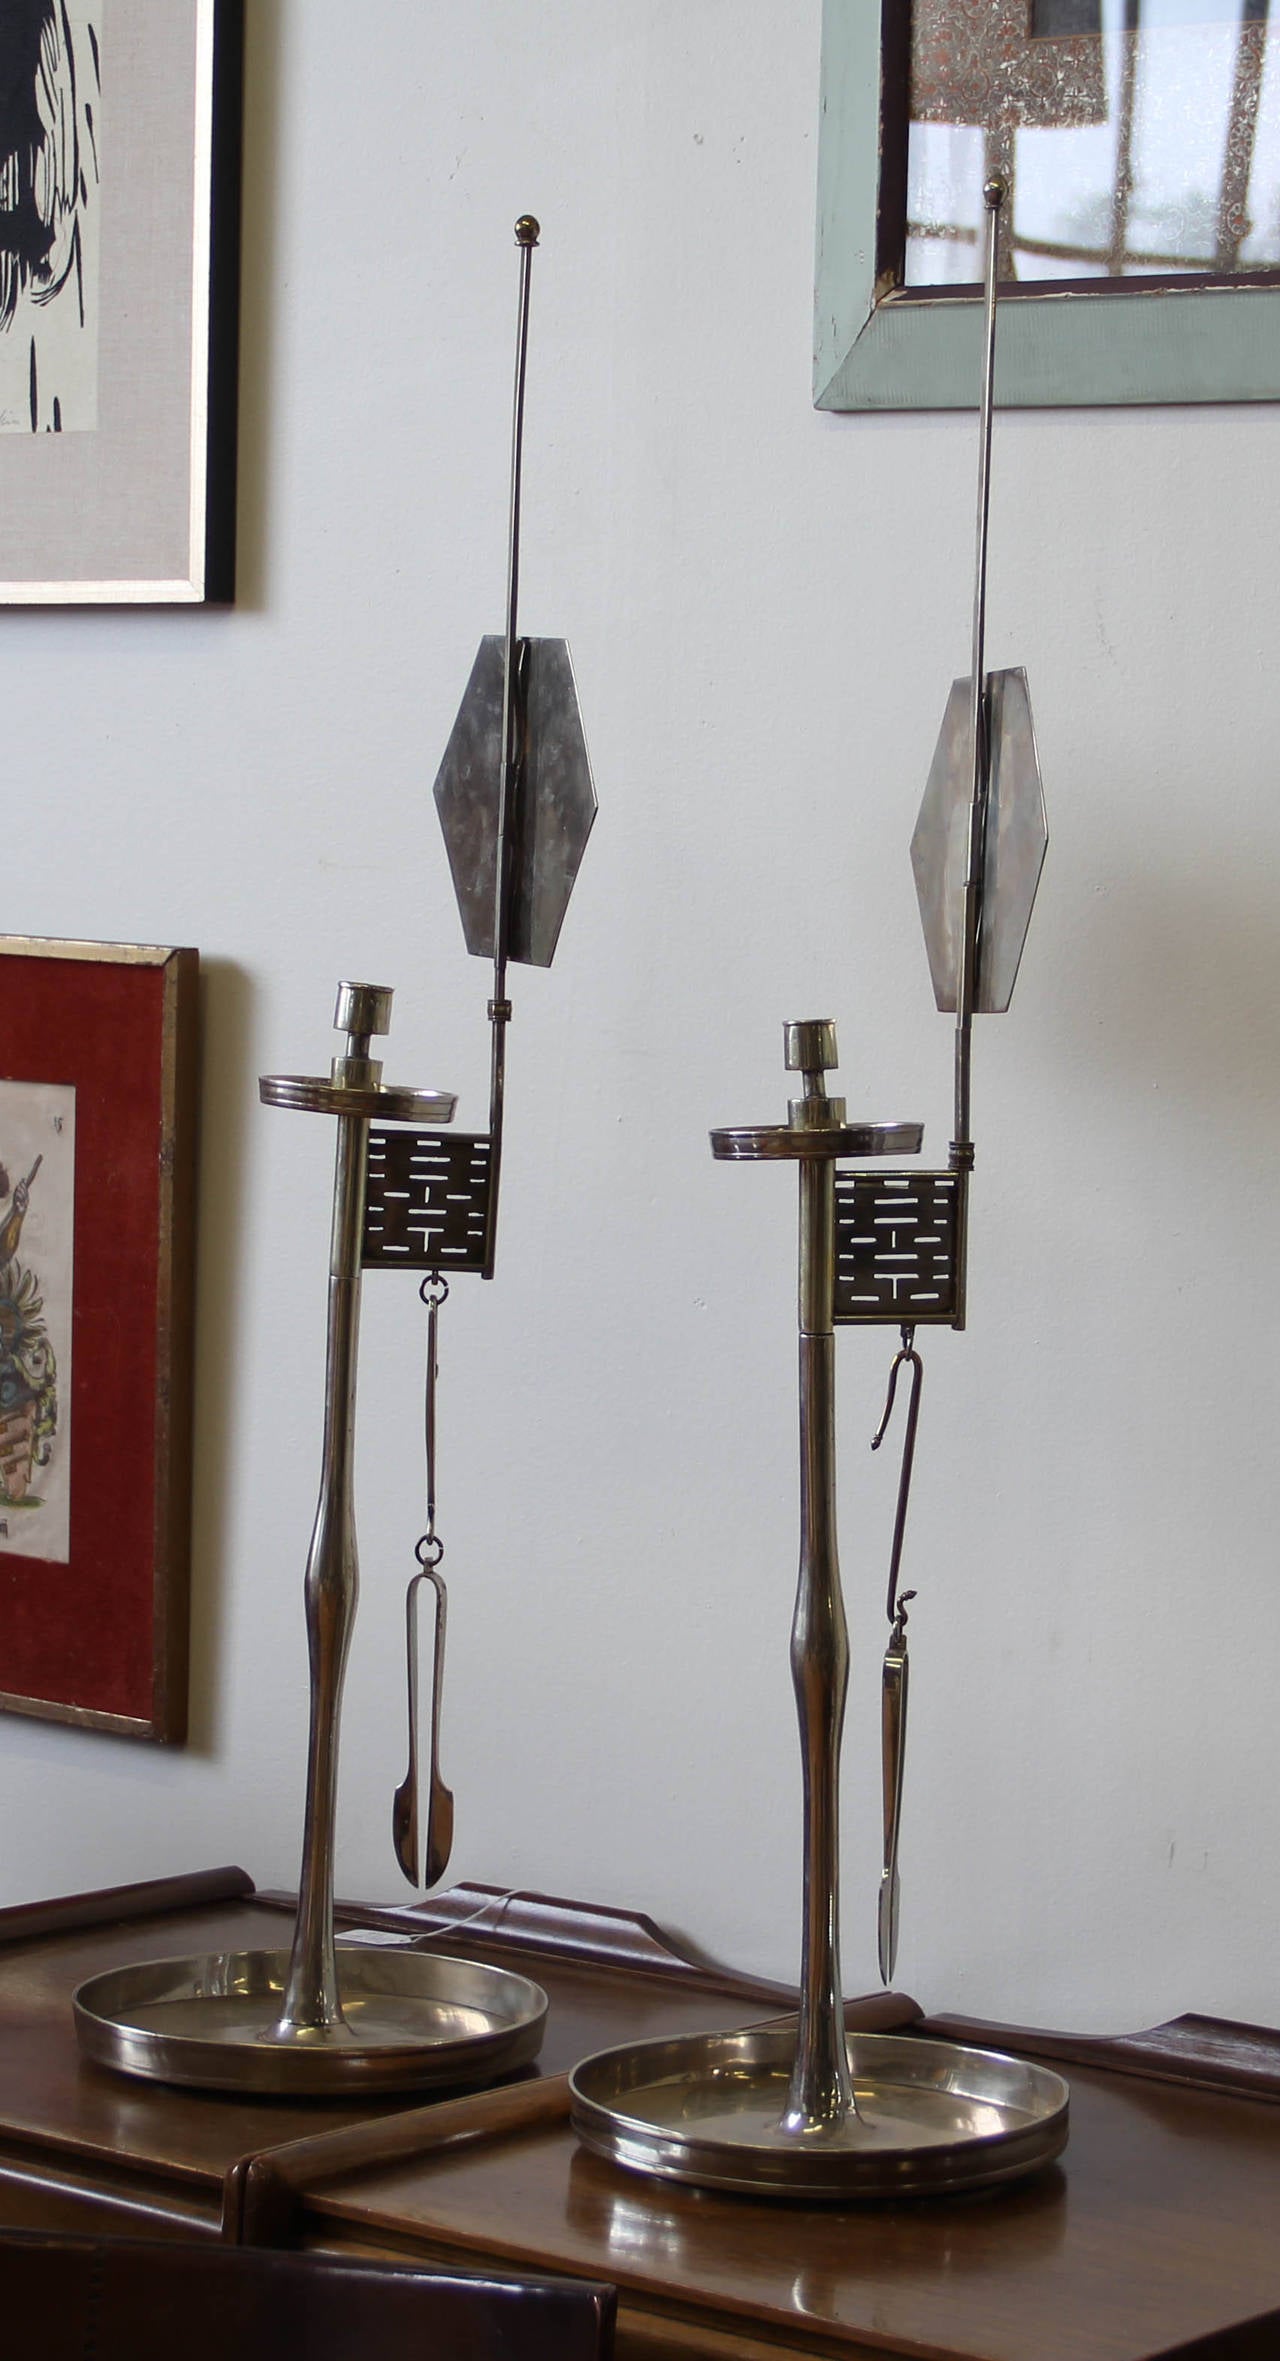 Japanese Arts and Crafts Nickel-Silver Candle Sticks Circa 1910 For Sale 2